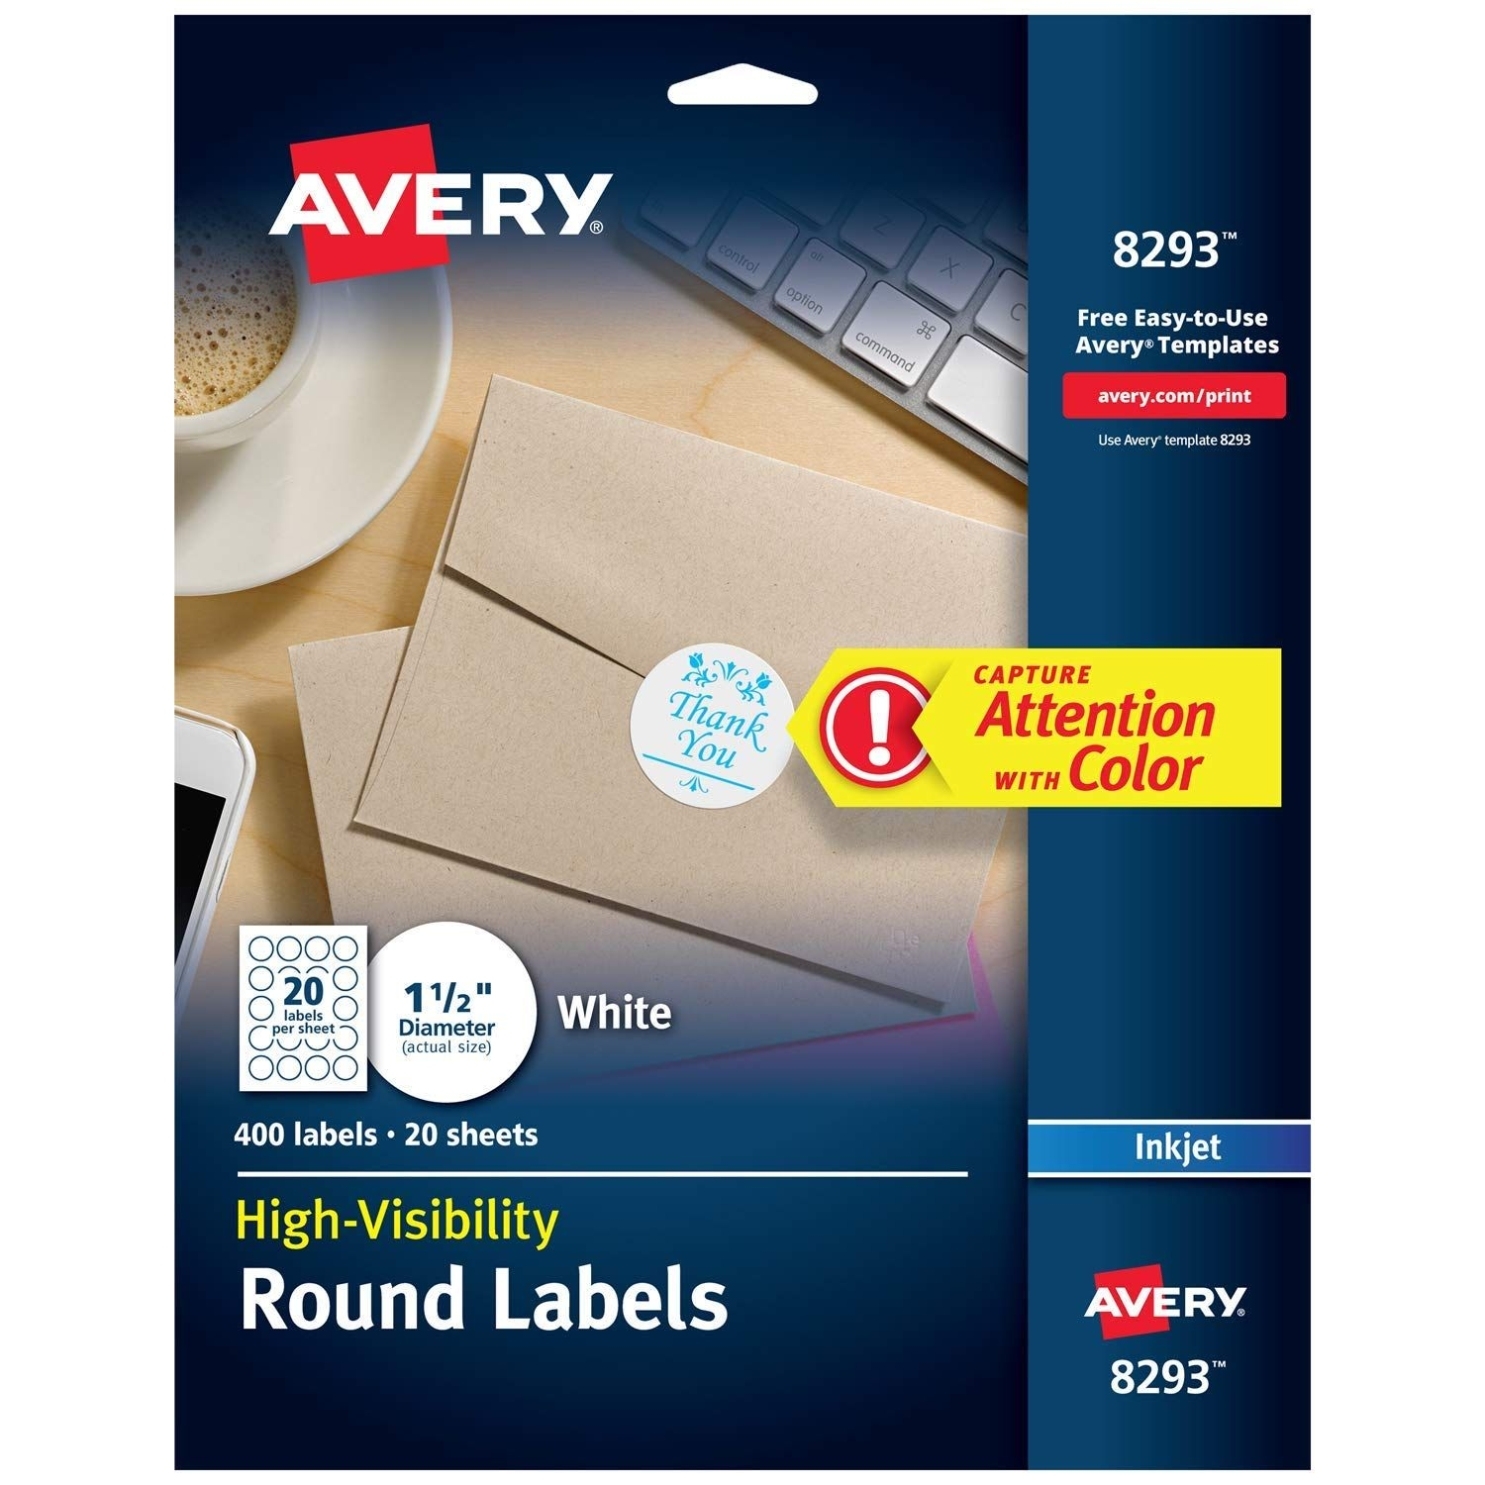 Avery 80 Labels Per Sheet Template For 80 Labels Per Sheet Template